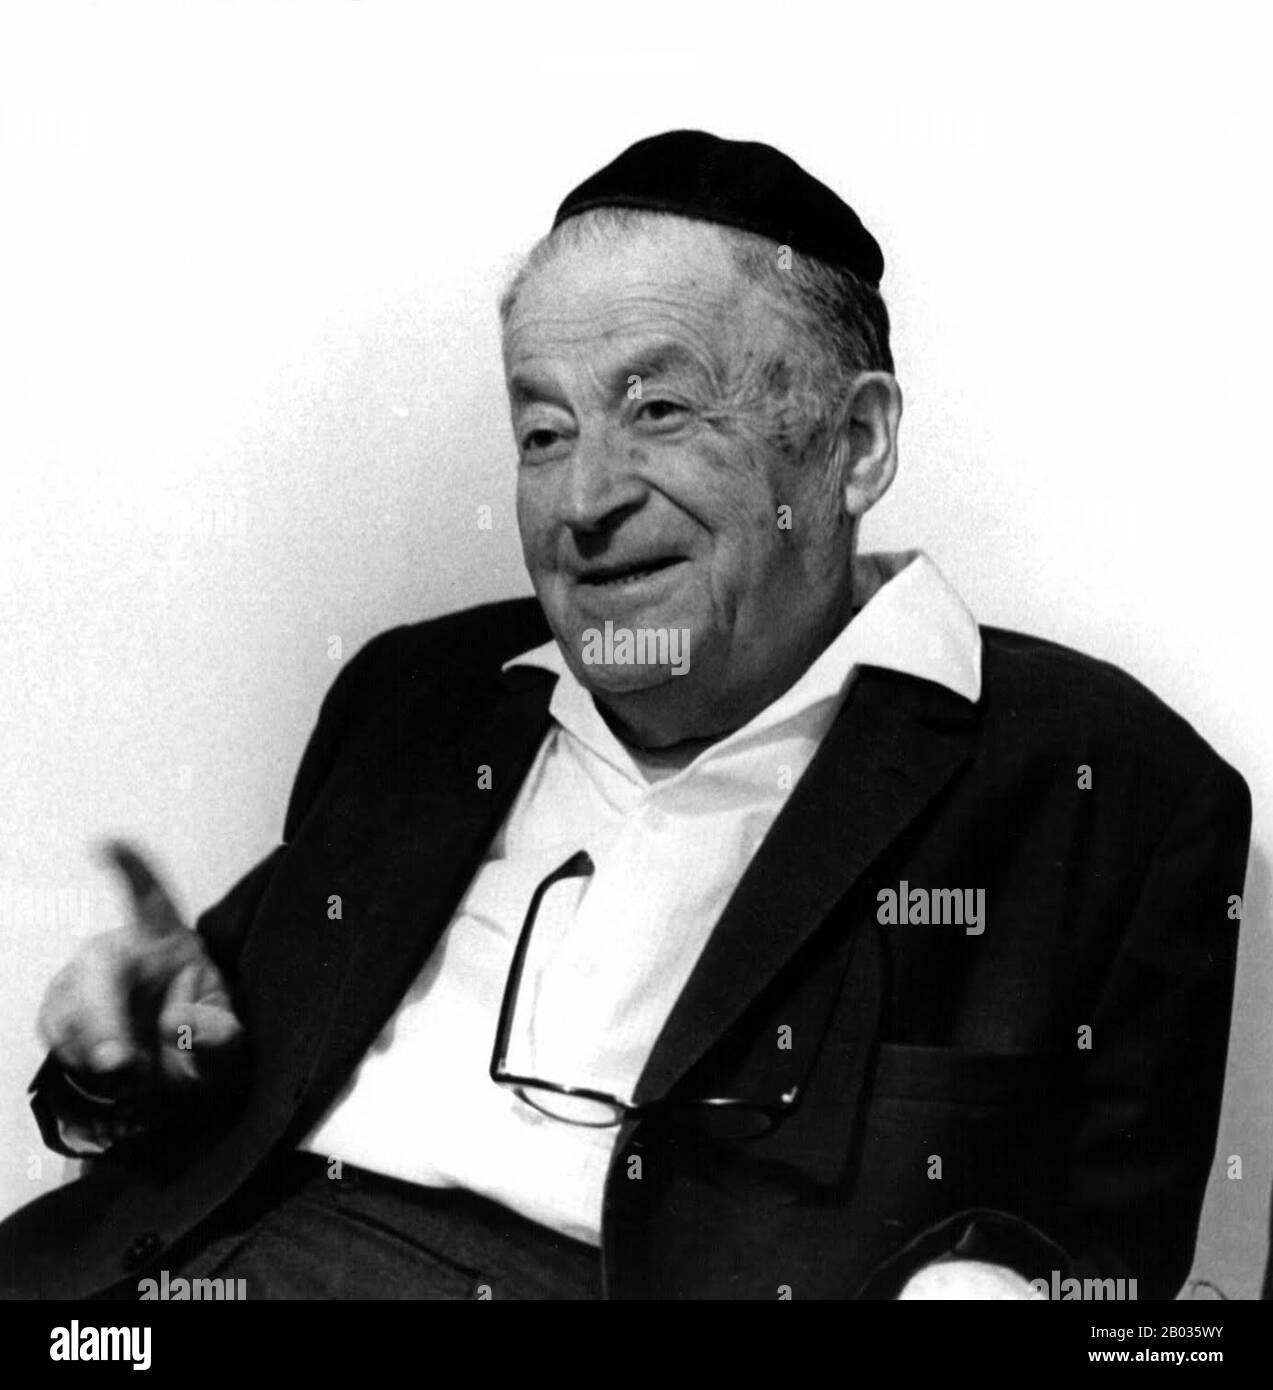 Shmuel Yosef Agnon (July 17, 1888 – February 17, 1970) was a Nobel Prize laureate writer and was one of the central figures of modern Hebrew fiction. In Hebrew, he is known by the acronym Shai Agnon. In English, his works are published under the name S. Y. Agnon.  Agnon was born in Polish Galicia, then part of the Austro-Hungarian Empire, and later immigrated to Mandatory Palestine, and died in Jerusalem.  His works deal with the conflict between the traditional Jewish life and language and the modern world. They also attempt to recapture the fading traditions of the European shtetl (village). Stock Photo